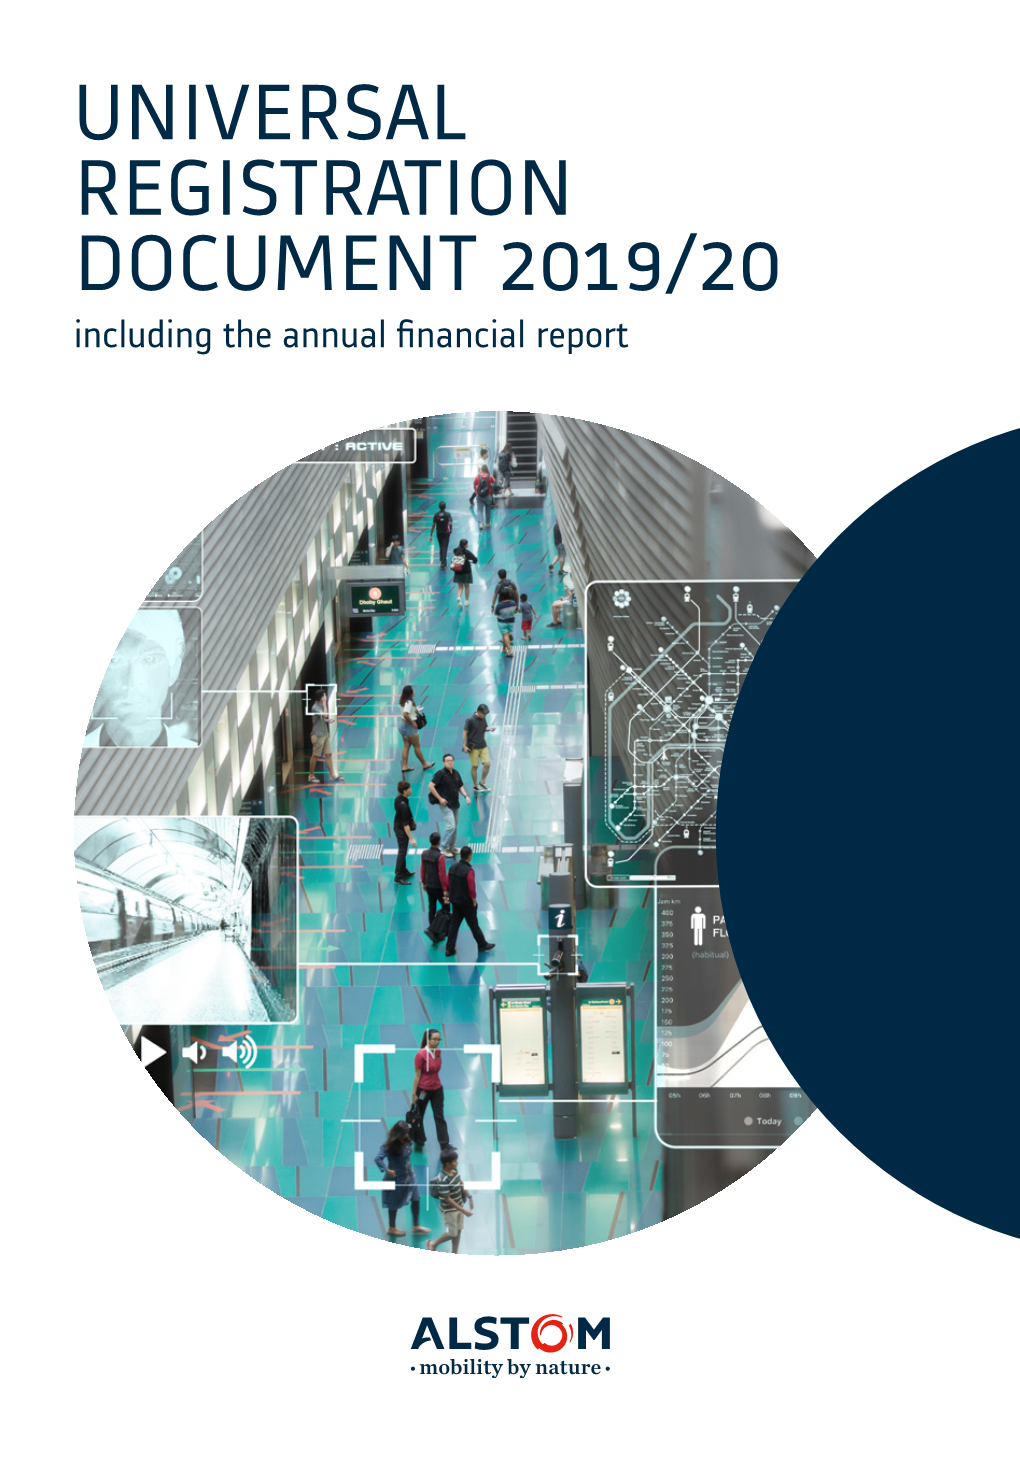 UNIVERSAL REGISTRATION DOCUMENT 2019/20 Including the Annual Financial Report CONTENTS